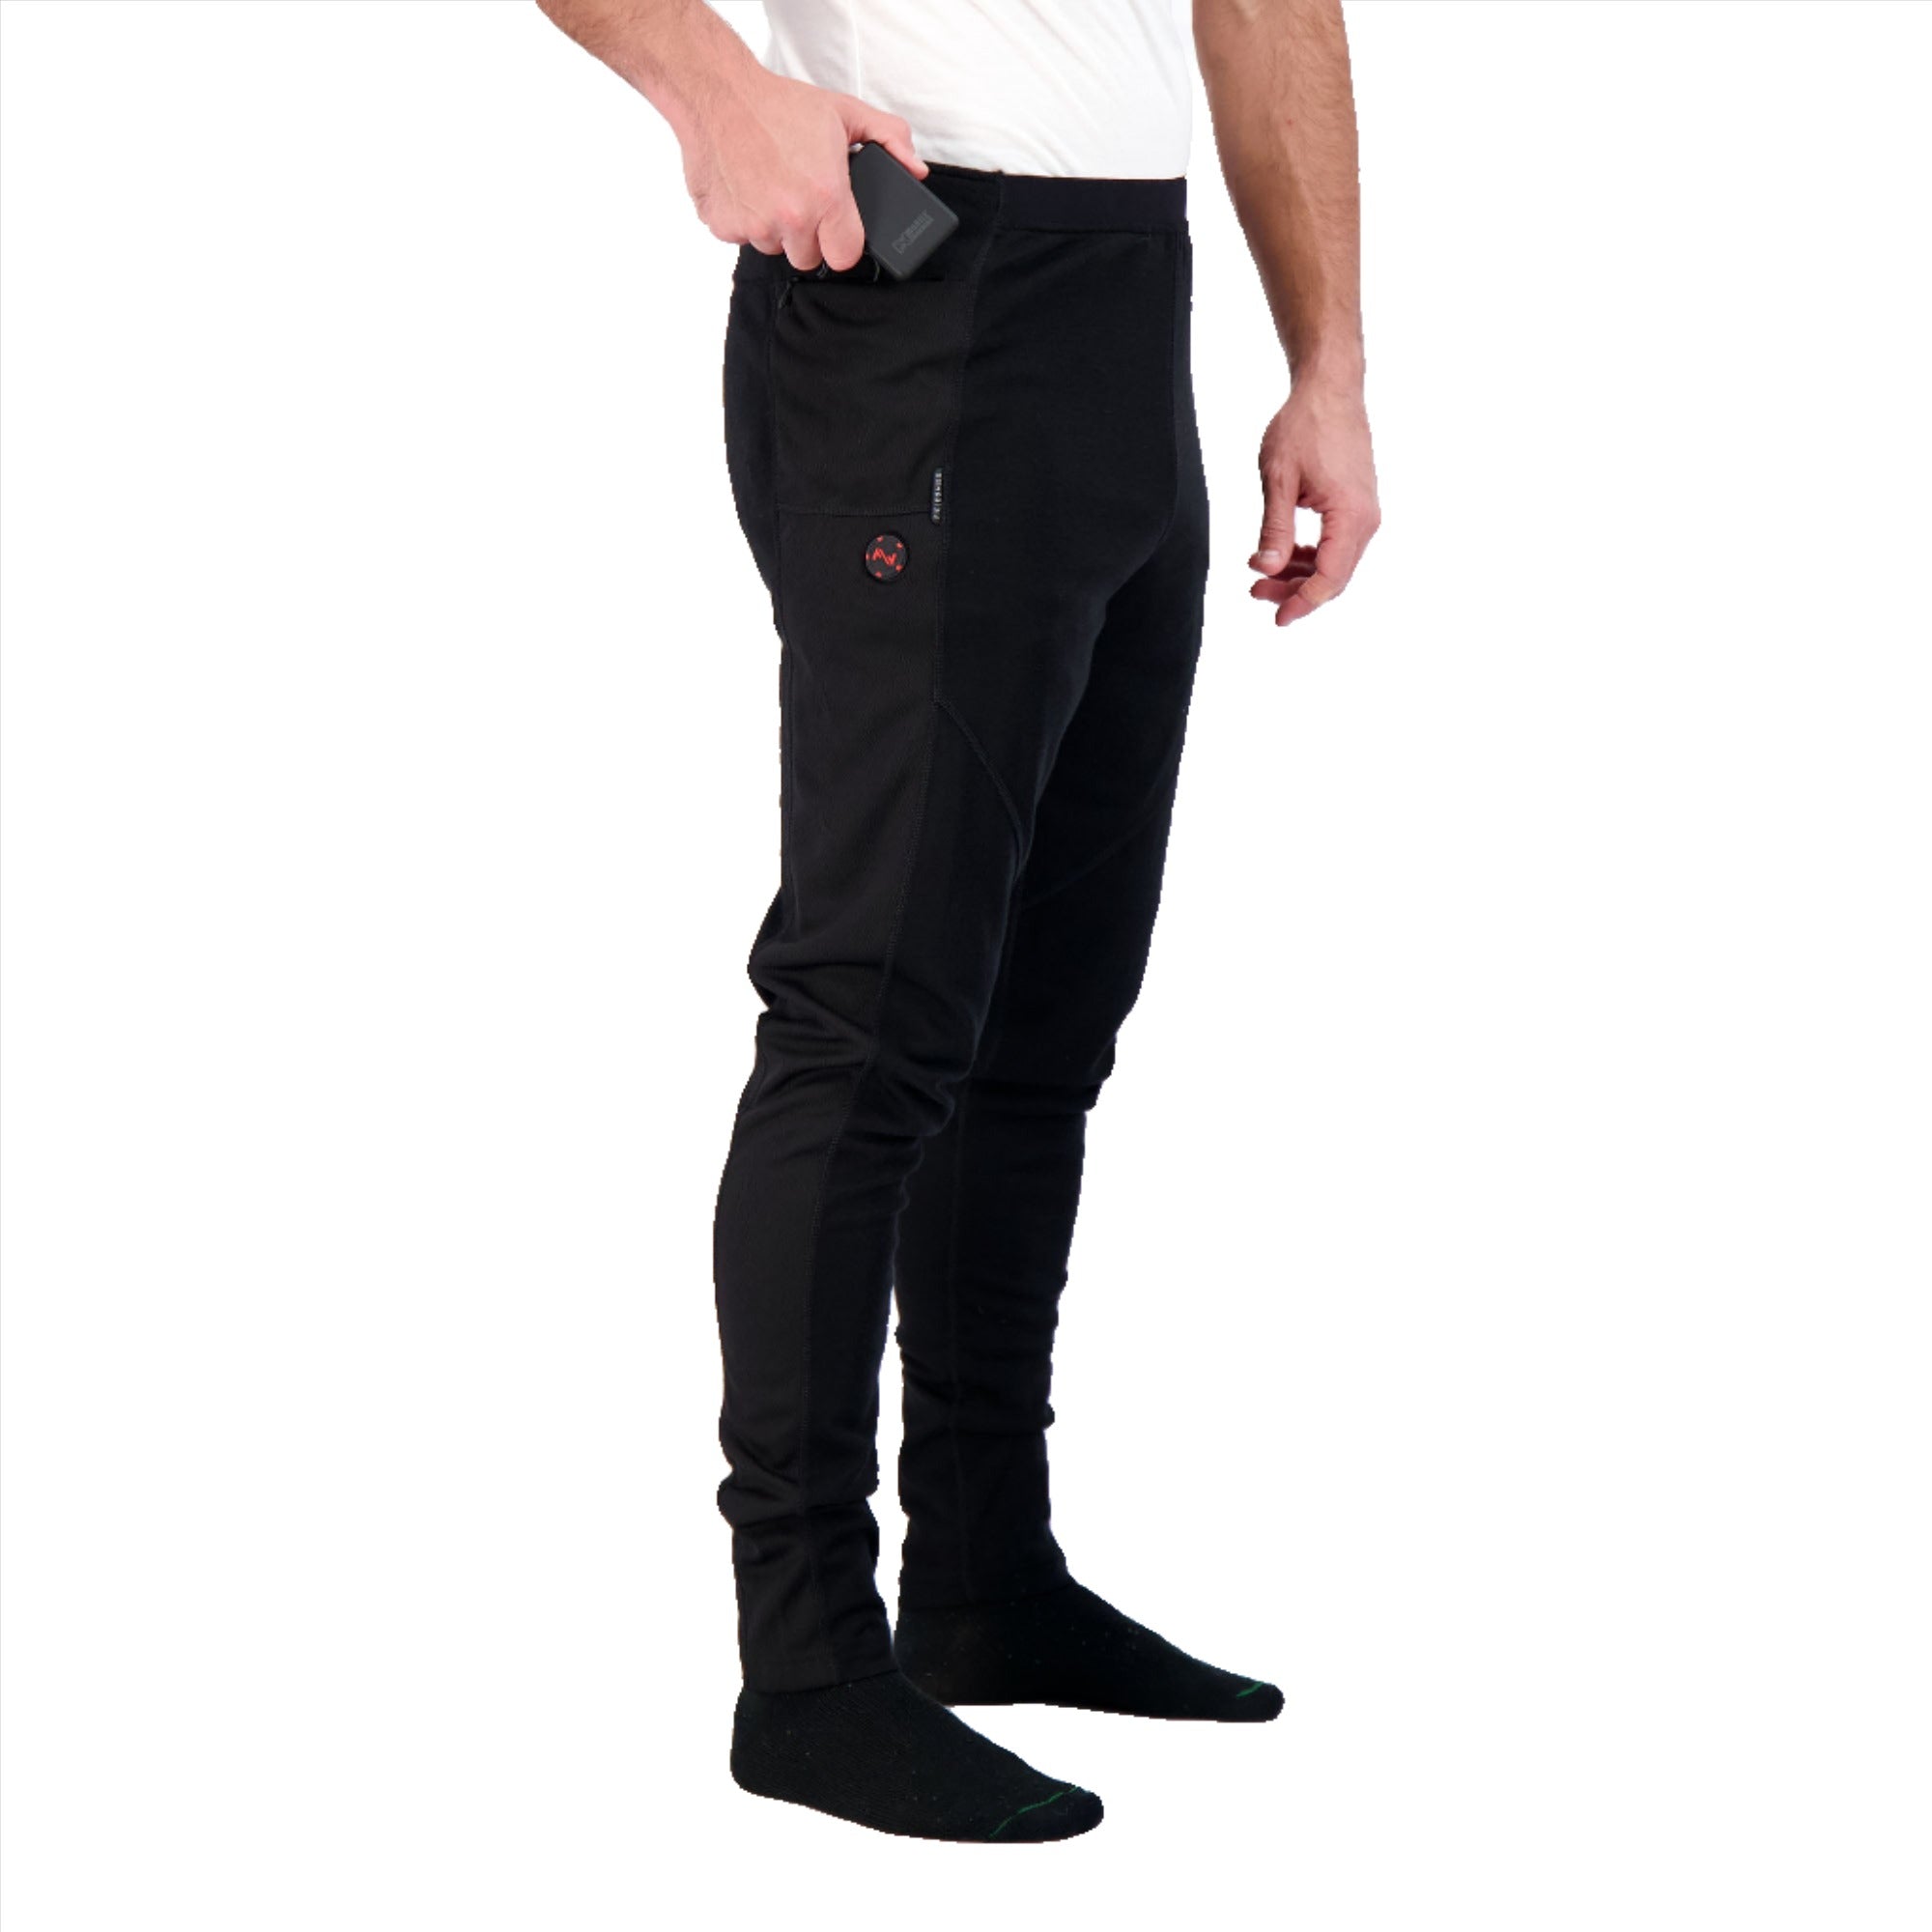 Mobile Warming 7.4V Women's Baselayer Ion Heated Pant - Previous Generation  - My Cooling Store